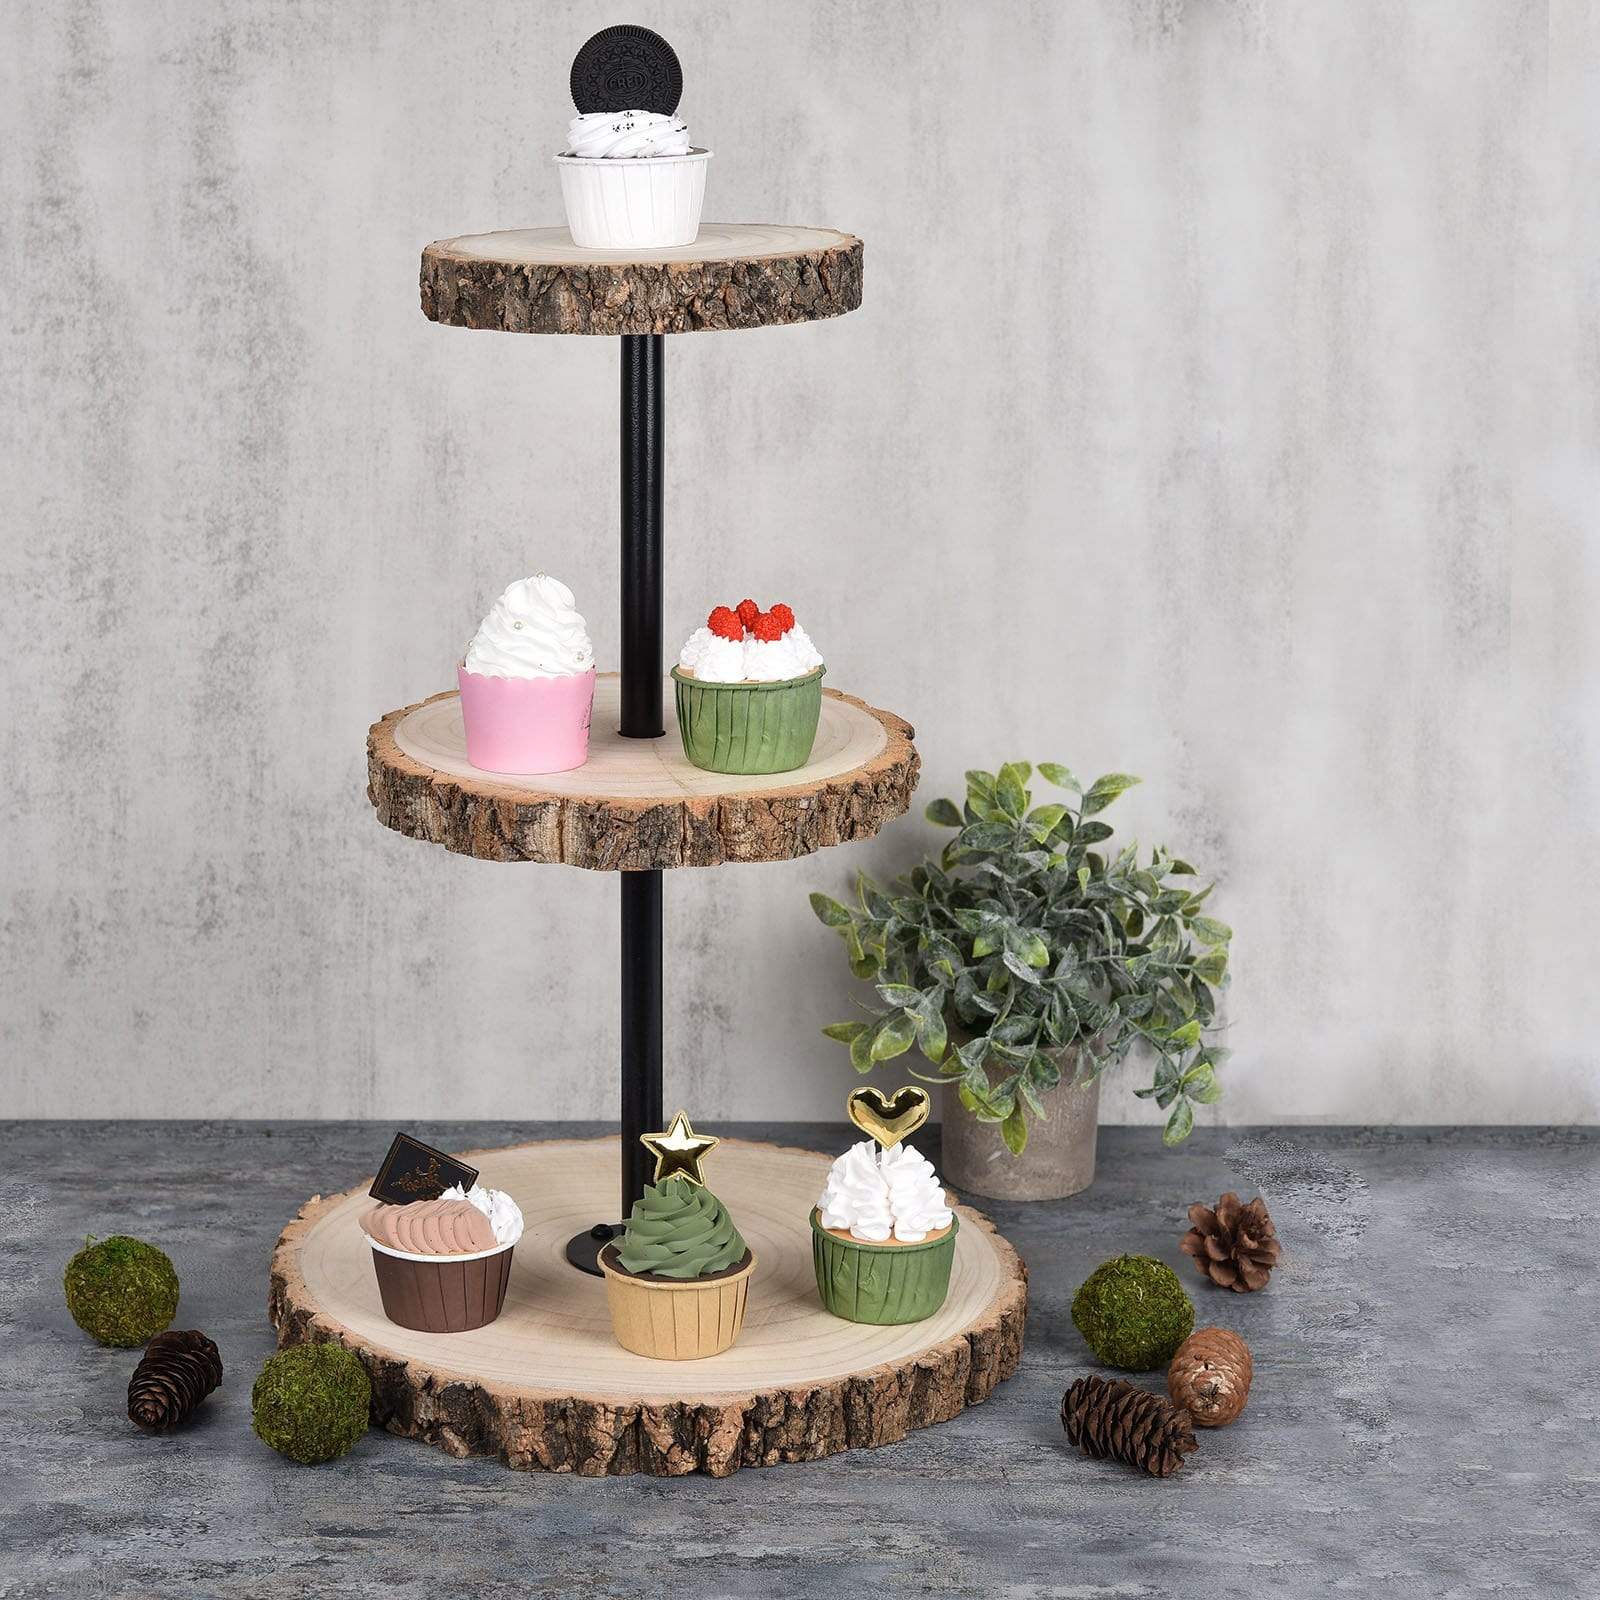 19 in 3 Tier Brown with Black Round Natural Wood Dessert Stand